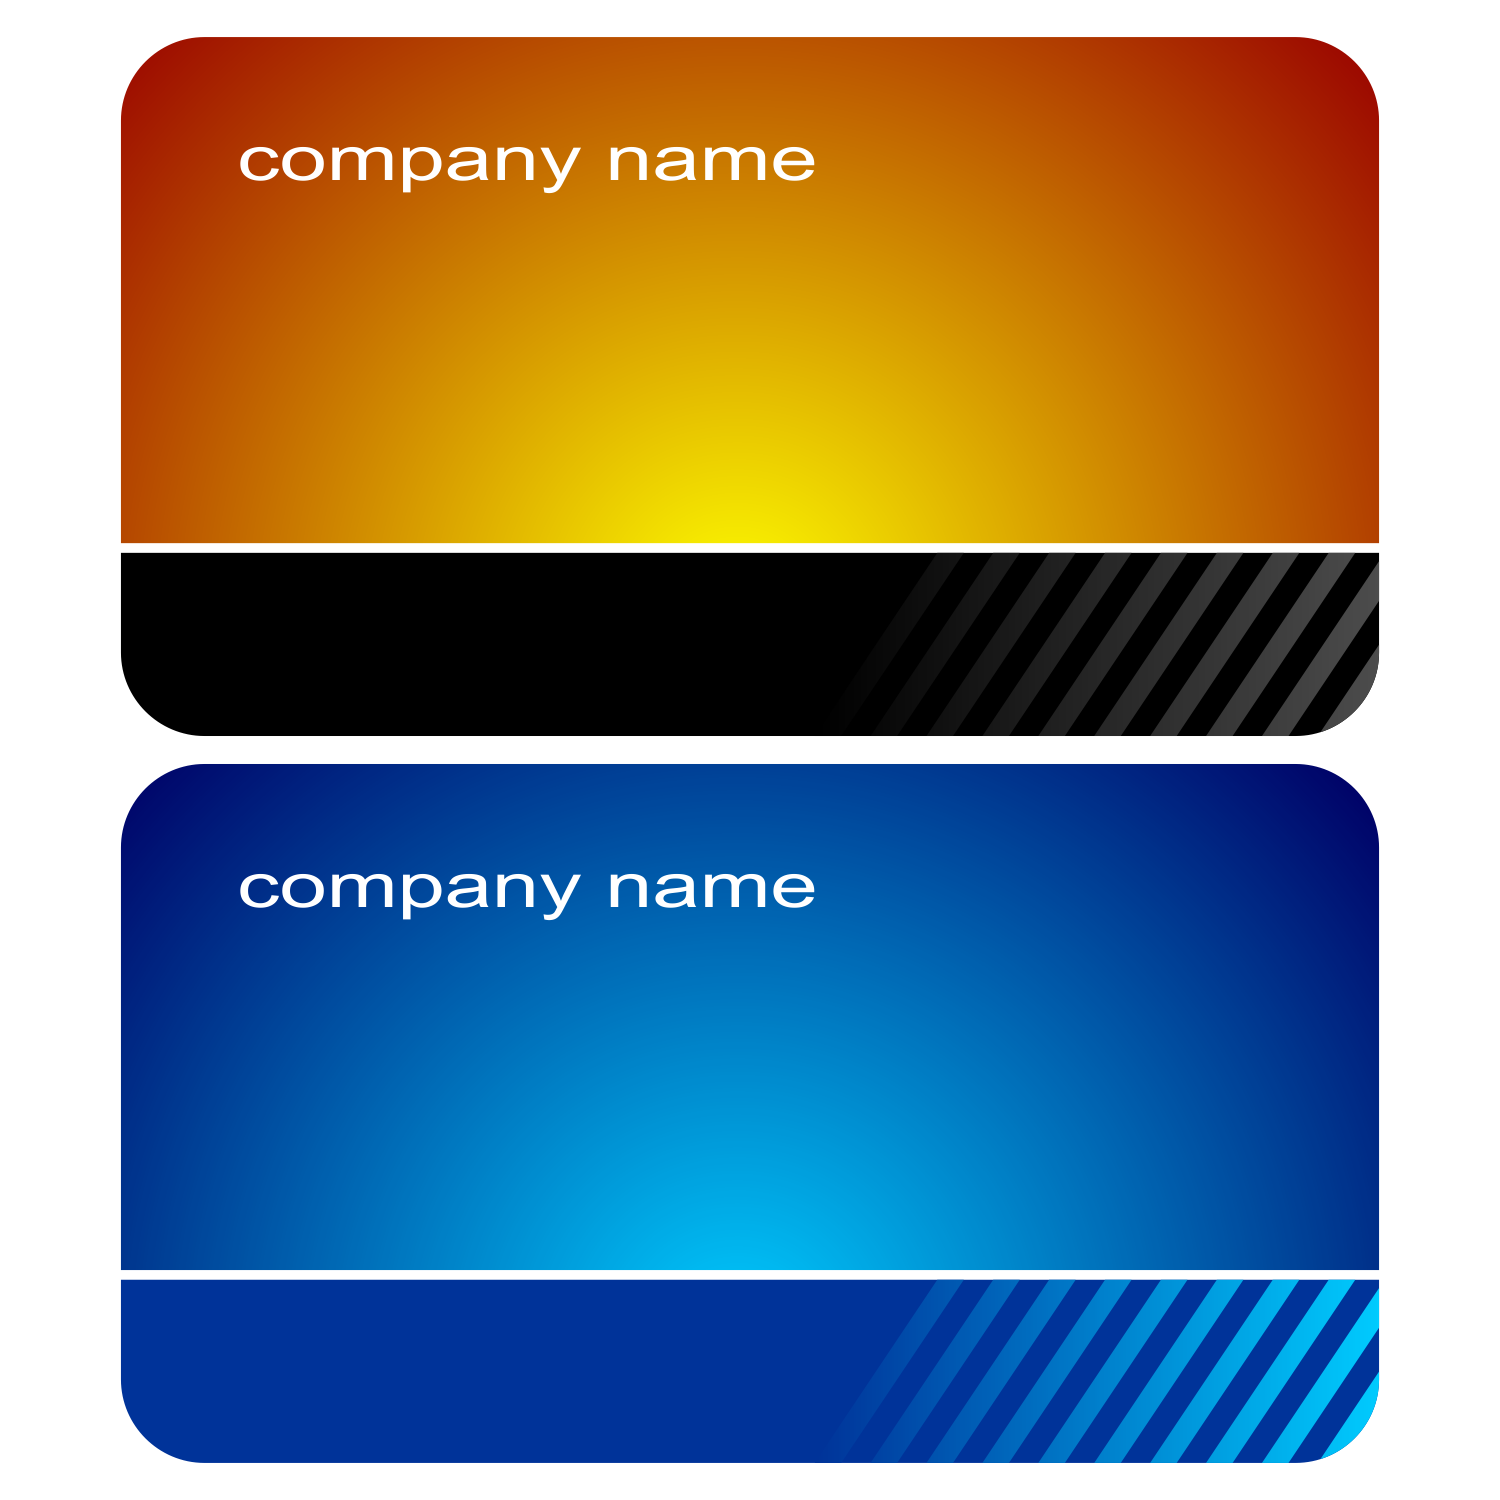 2 Stylish Business Cards Vector - For Business Use, Transparent background PNG HD thumbnail